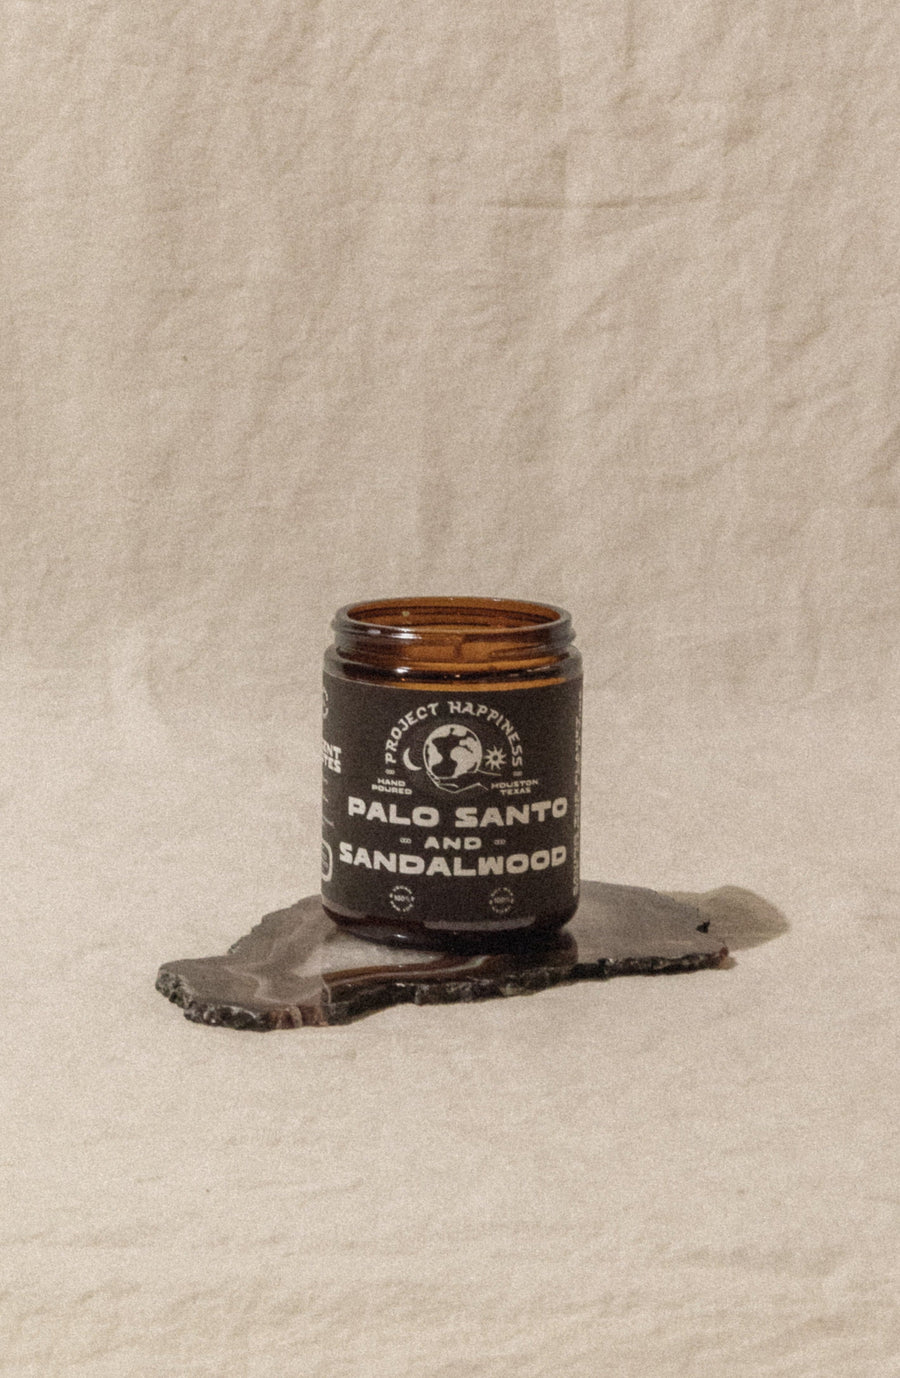 Project Happiness Candle Co. Objects Project Happiness Candle .:. Palo Santo & Sandalwood